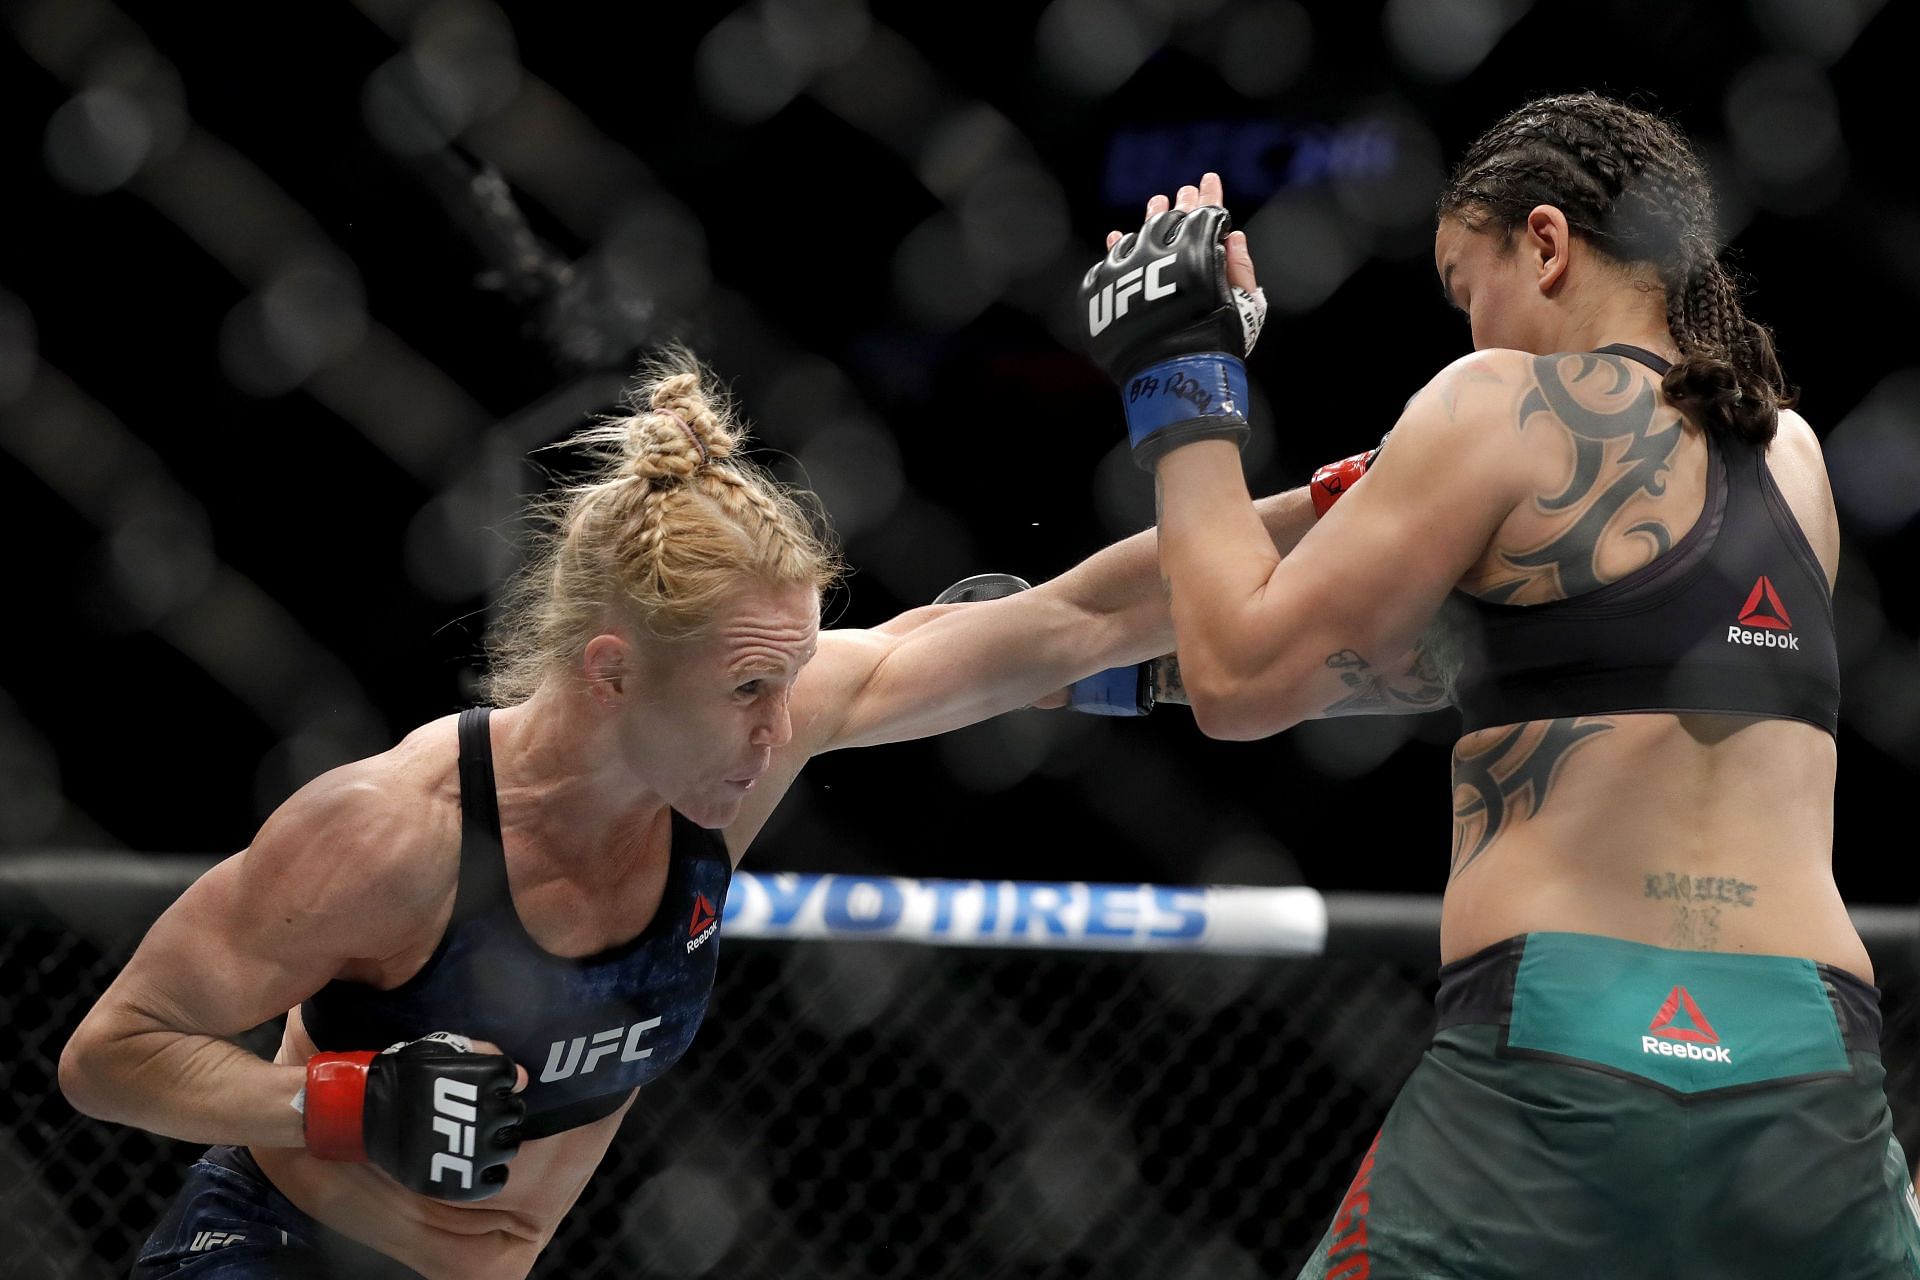 Despite her star power, Holly Holm has rarely produced highlight reel moments in the octagon